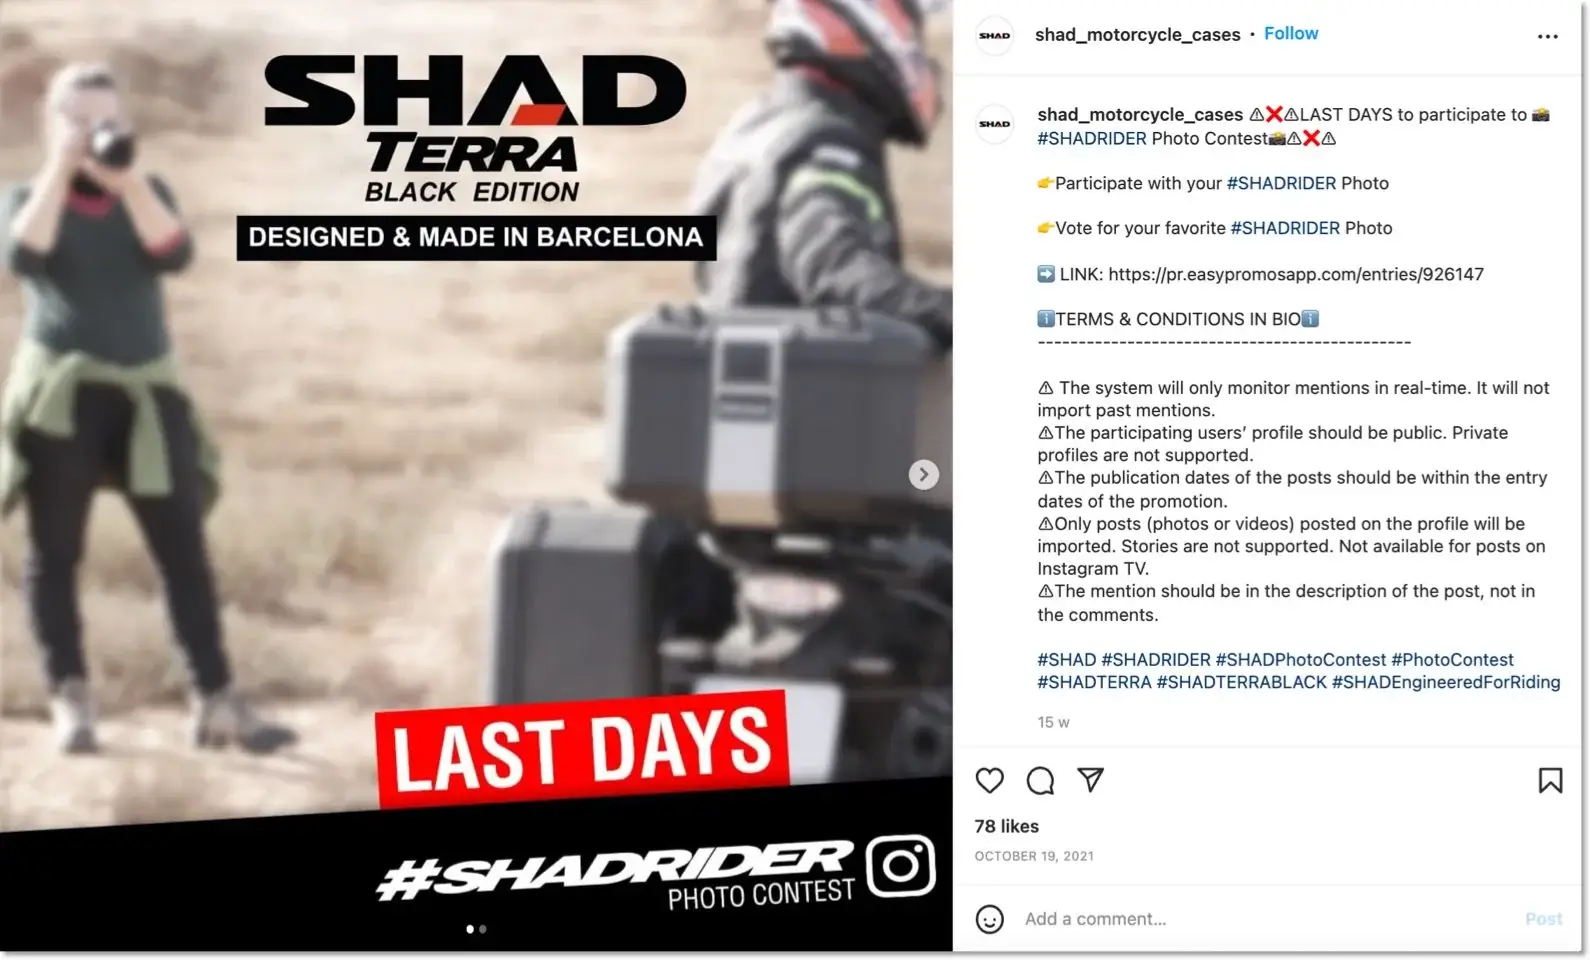 shad and their instagram mention and hashtag contest